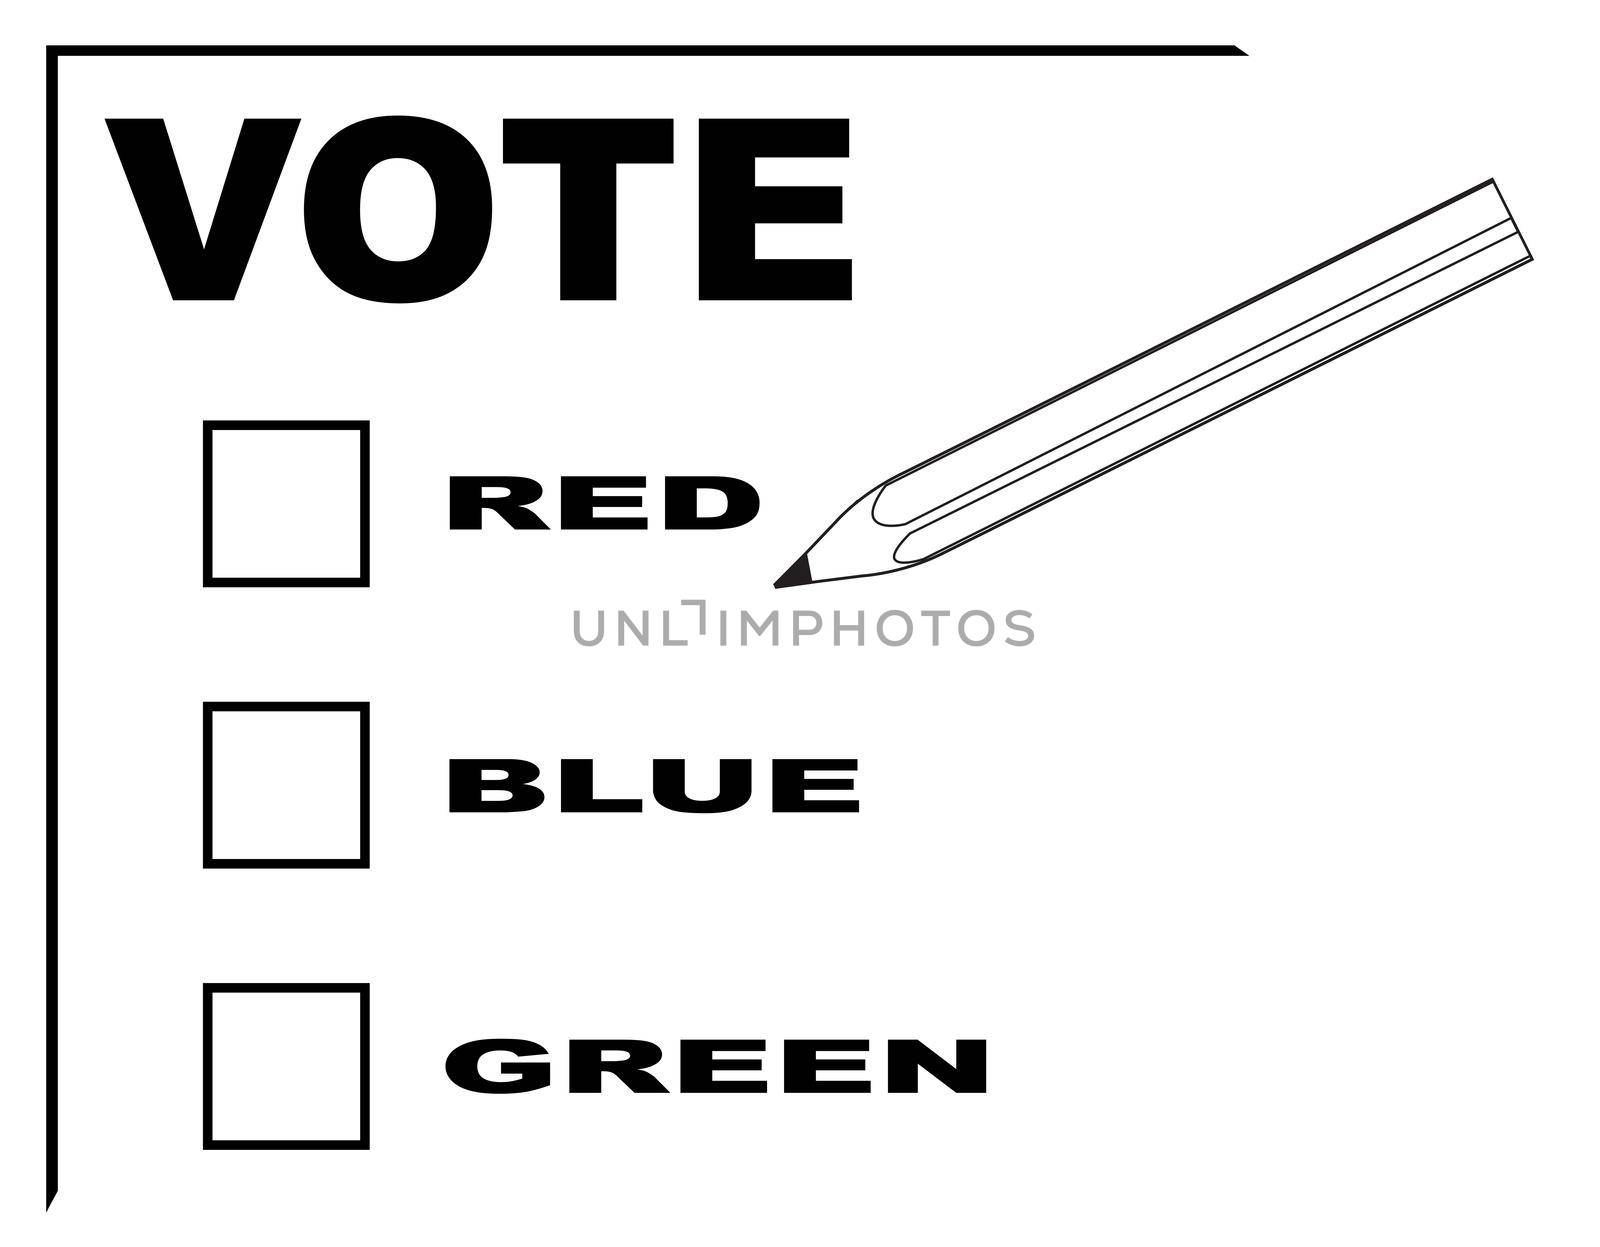 A vote slip for red blue or green with pencil